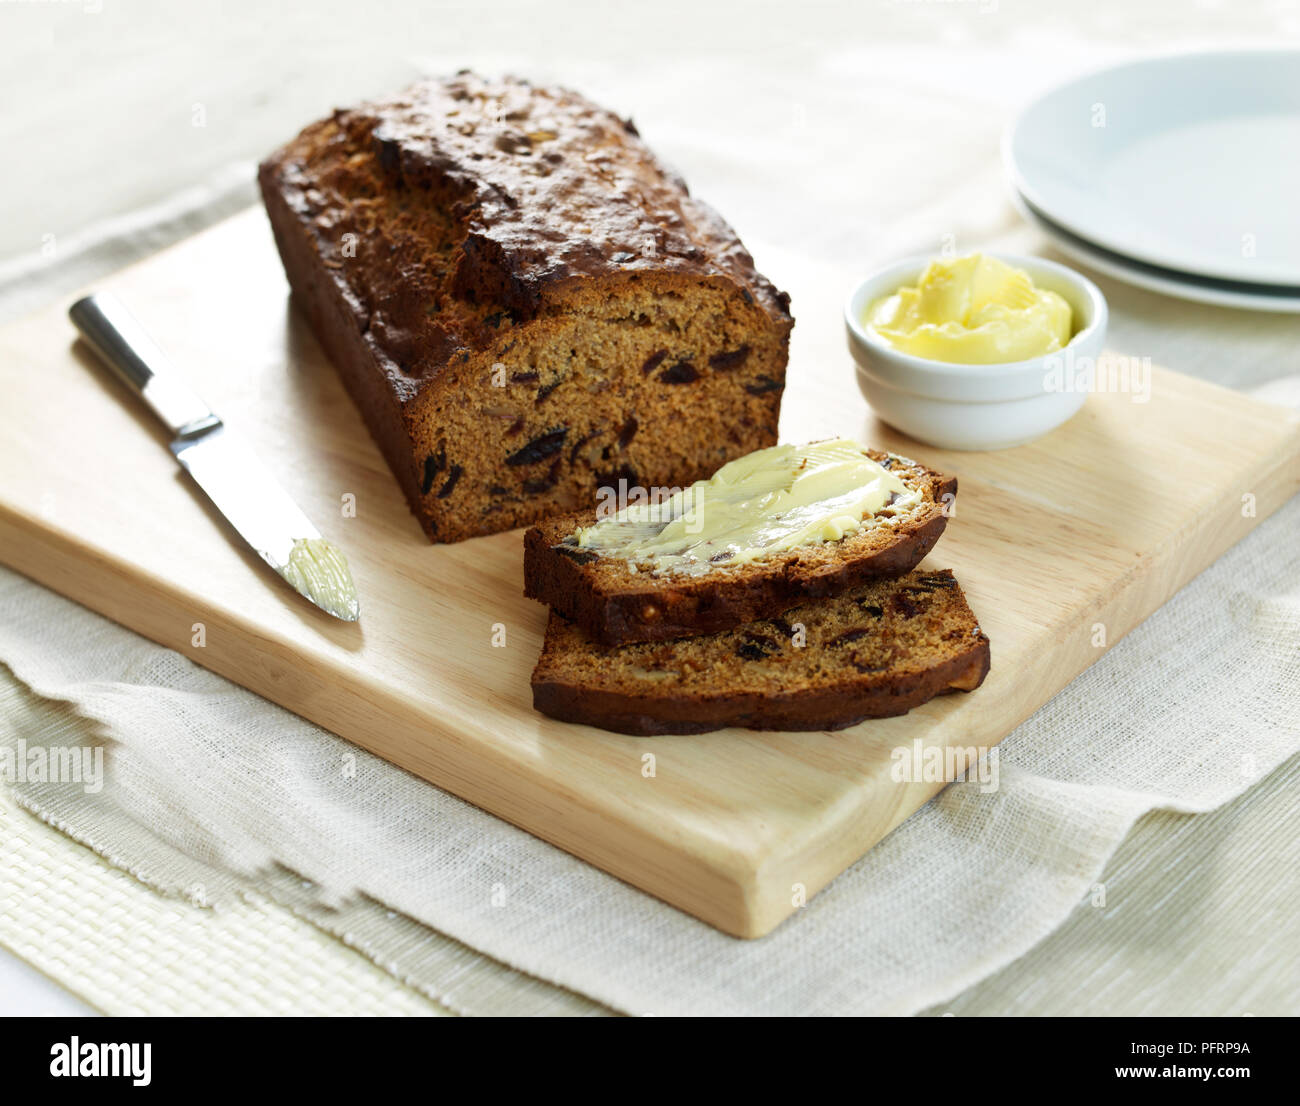 Date and walnut loaf with some slices cut away and one of the slices buttered, knife and butter nearby Stock Photo